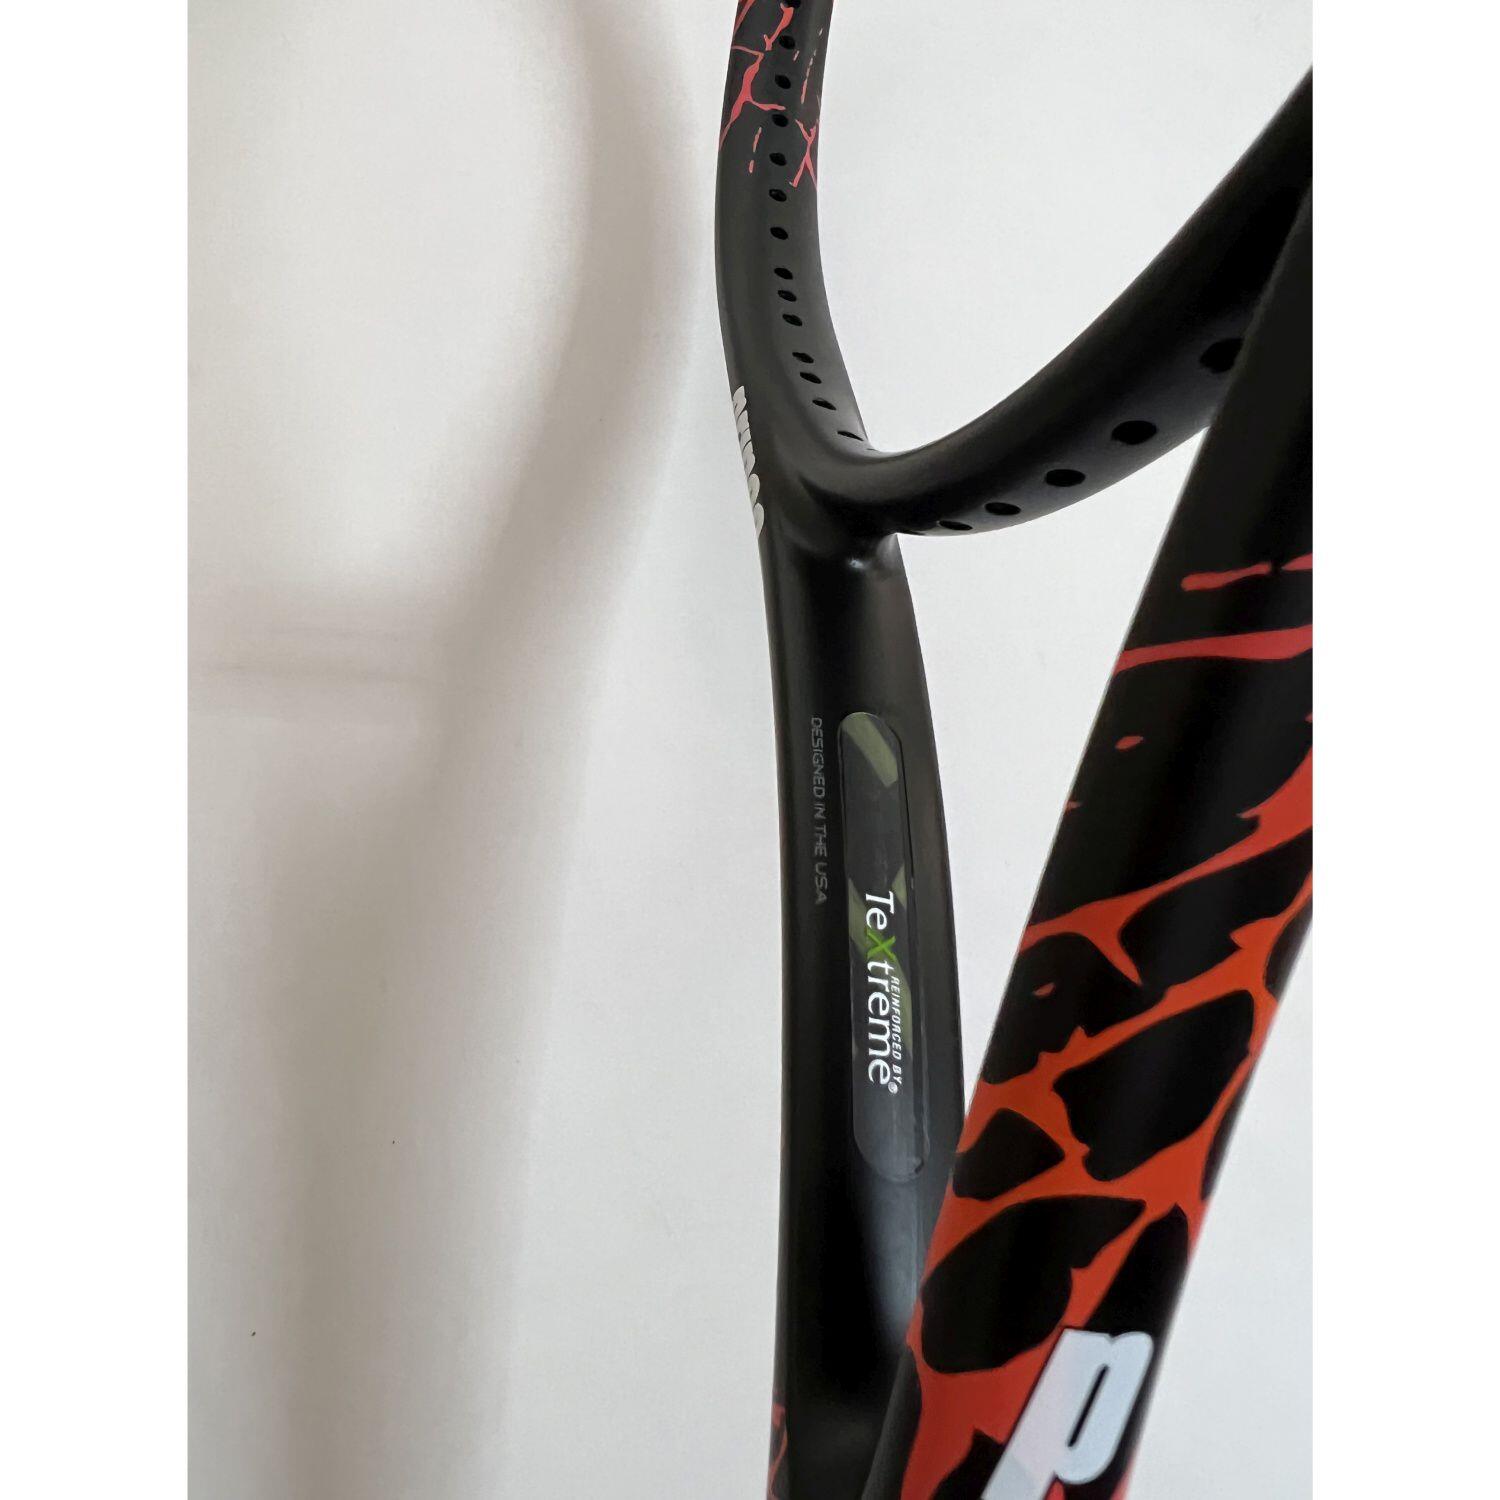 Prince Textreme Beast 100 280g Tennis Racket - Frame Only 6/6